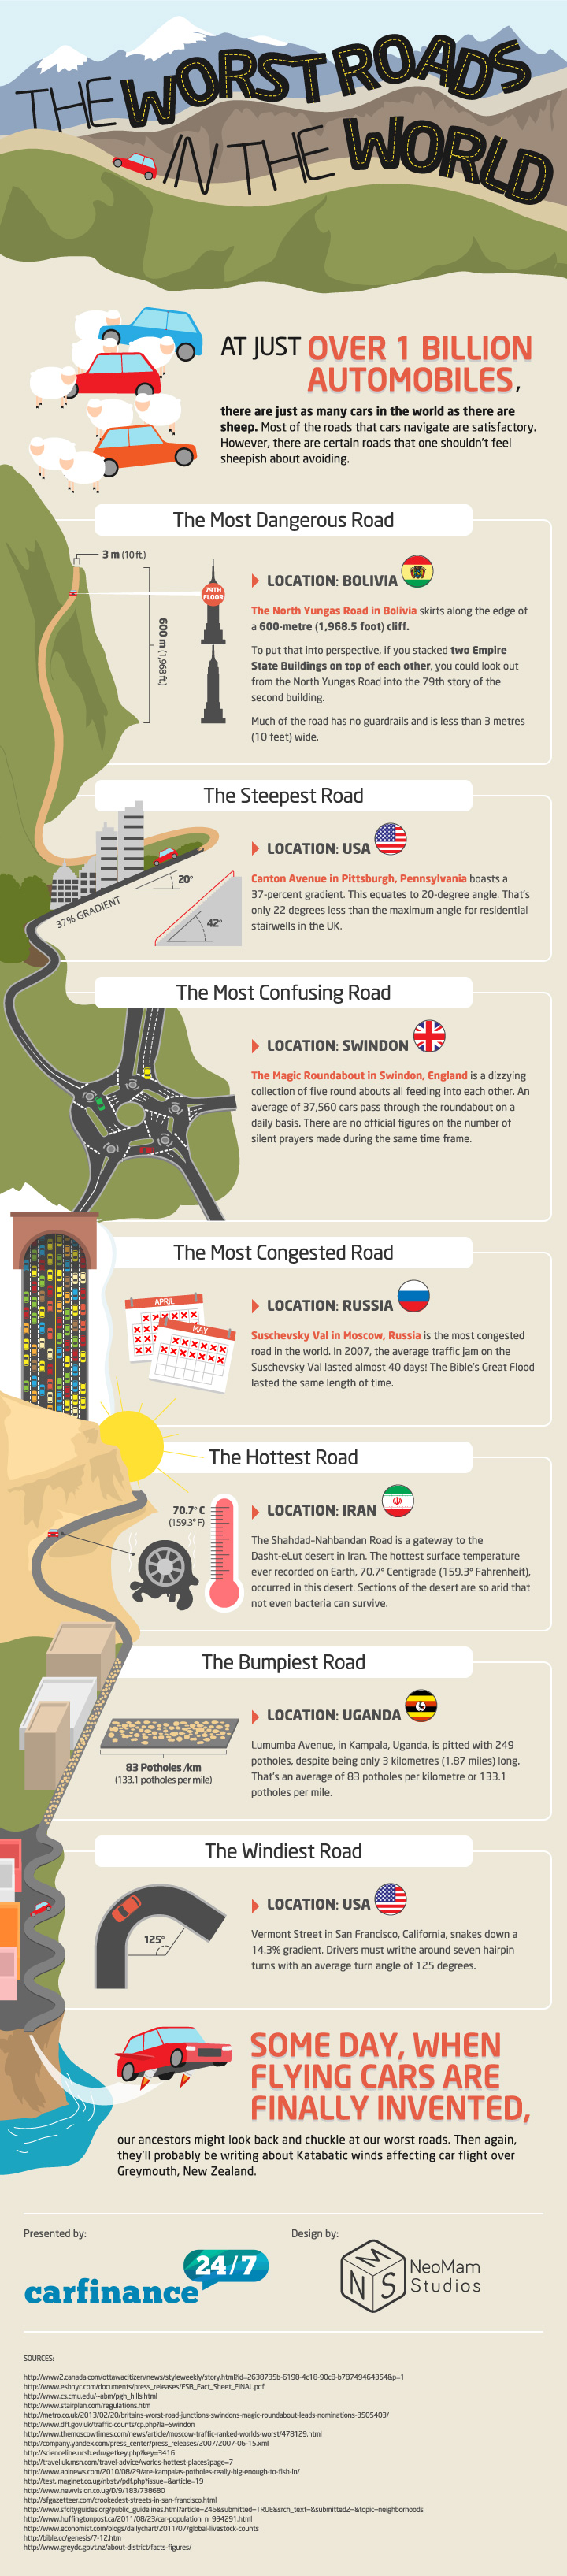 The Worst Roads in the World